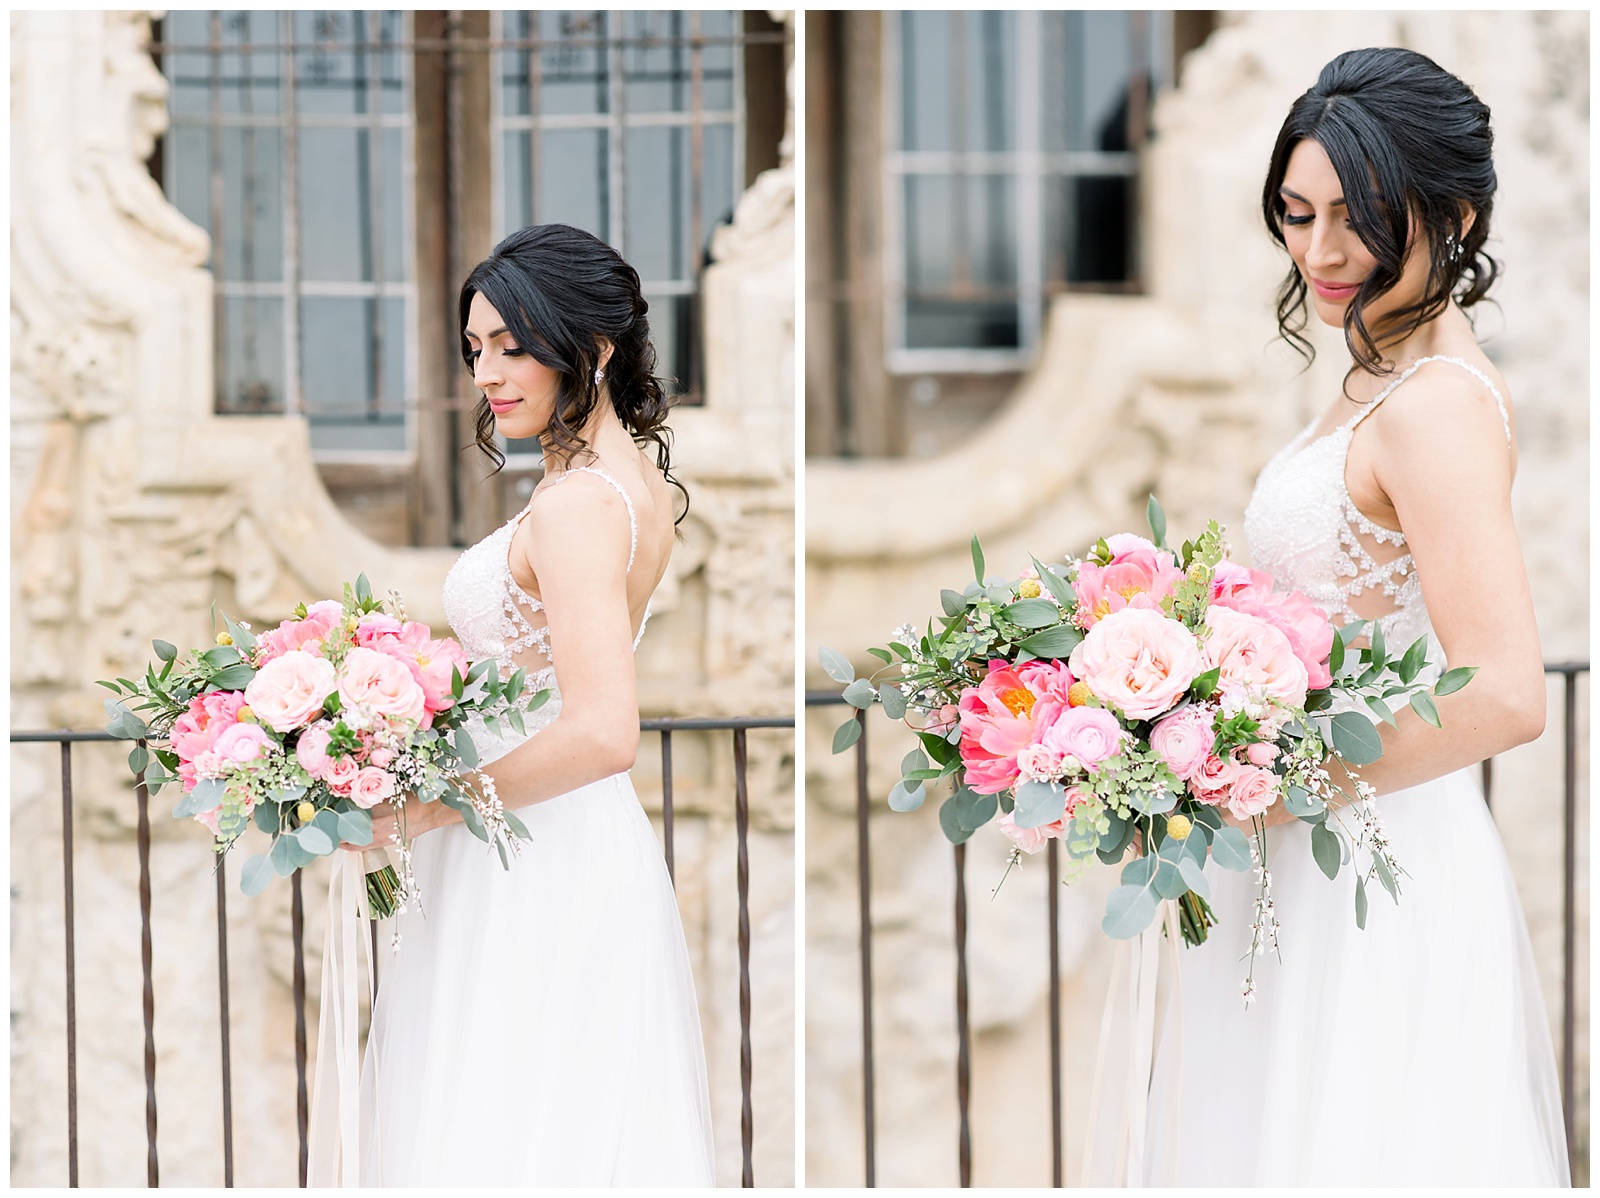 Beautiful Pink and Orange fine art bouquet for her Spanish Missions Bridal Portraits in San Antonio, TX with Monica Roberts Photography | www.monicaroberts.com